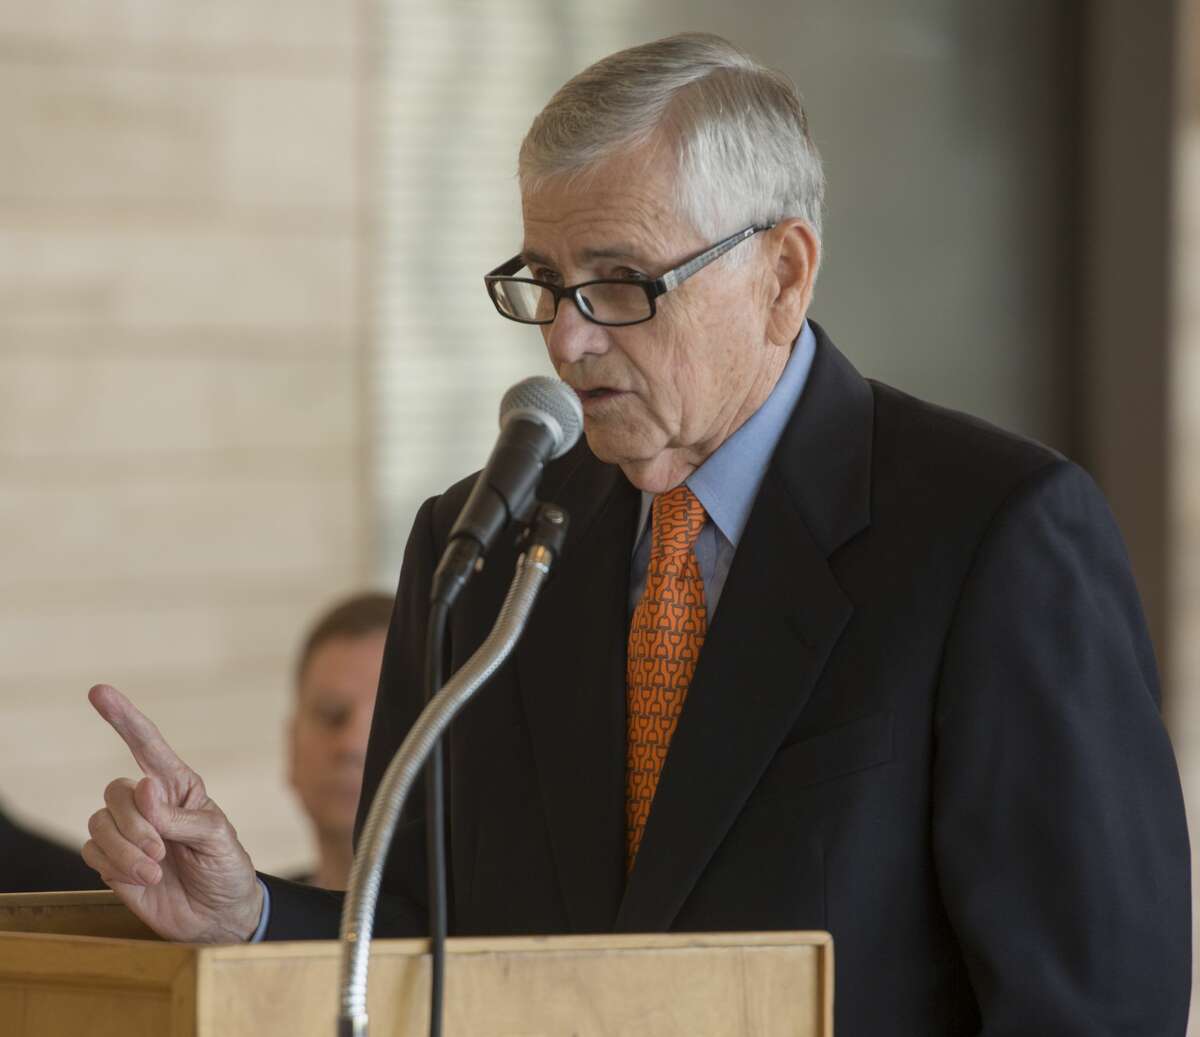 Tom Craddick, Texas House of Representatives, speaks 03-24-17 about the new Engineering Department Building UTPB will soon break ground for building on the Midland Campus near the CEED Building and Wagner Noel Performing Arts Center. Tim Fischer/Reporter-Telegram